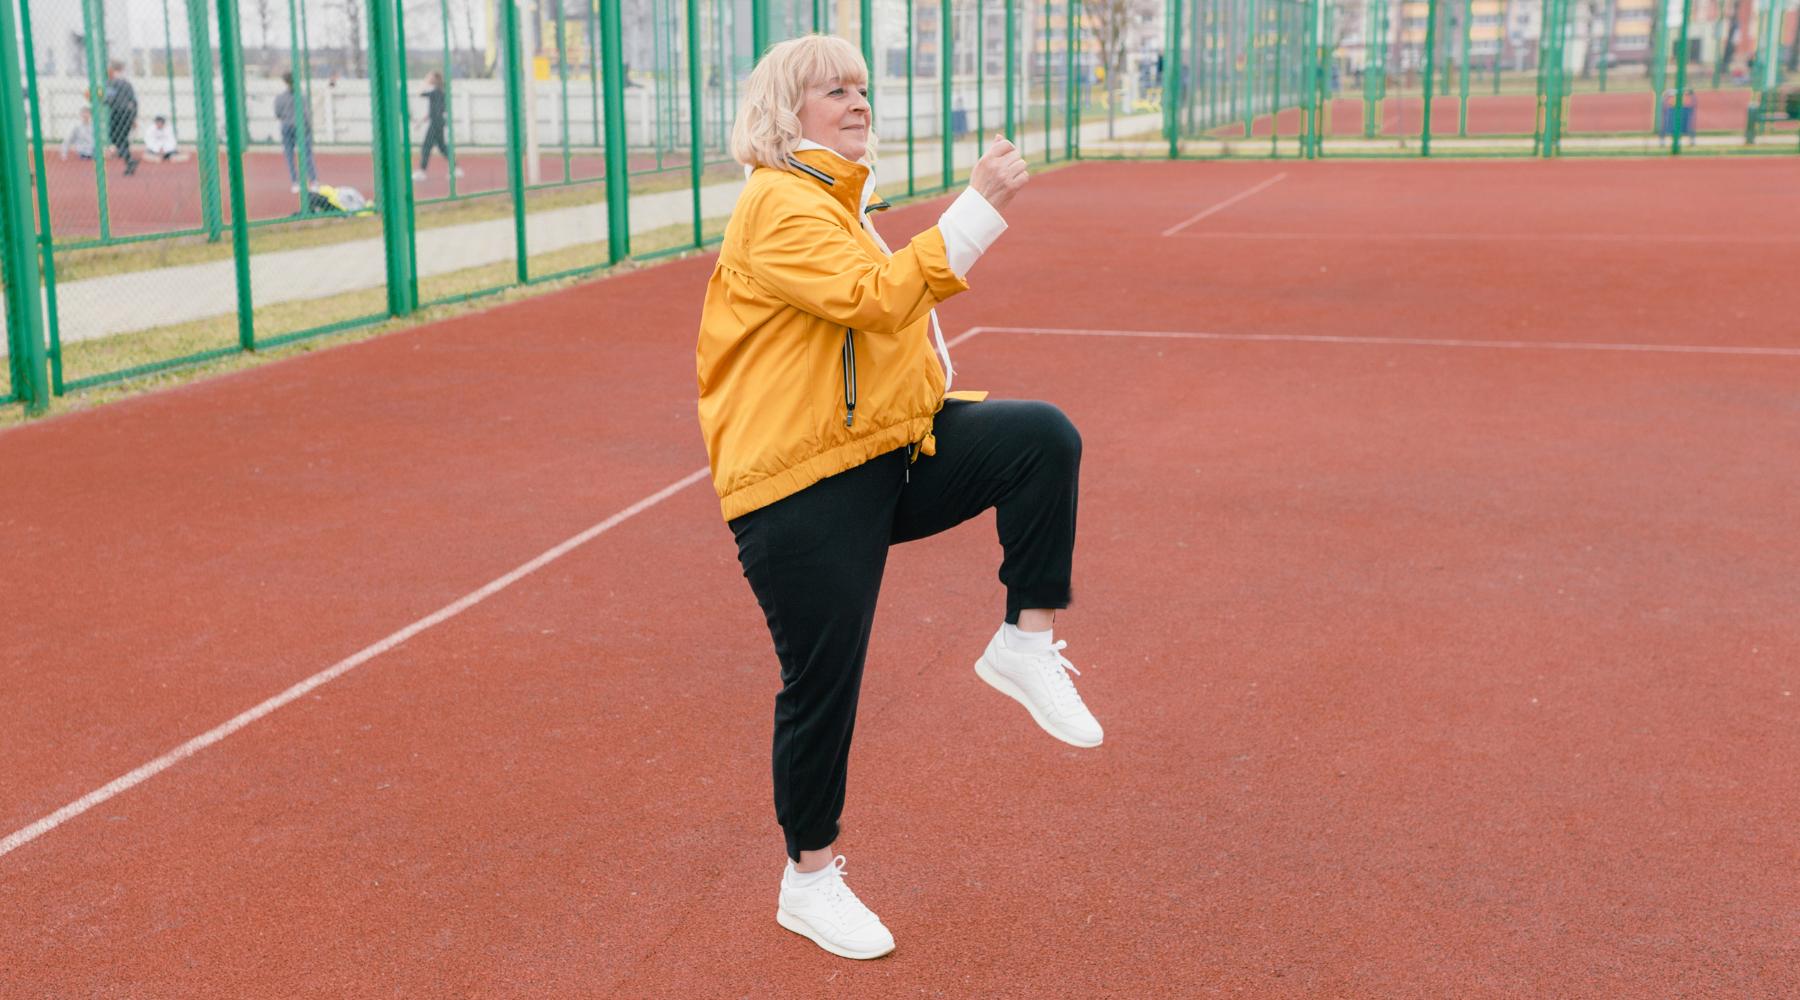 Elderly woman stretching and warming up outdoors